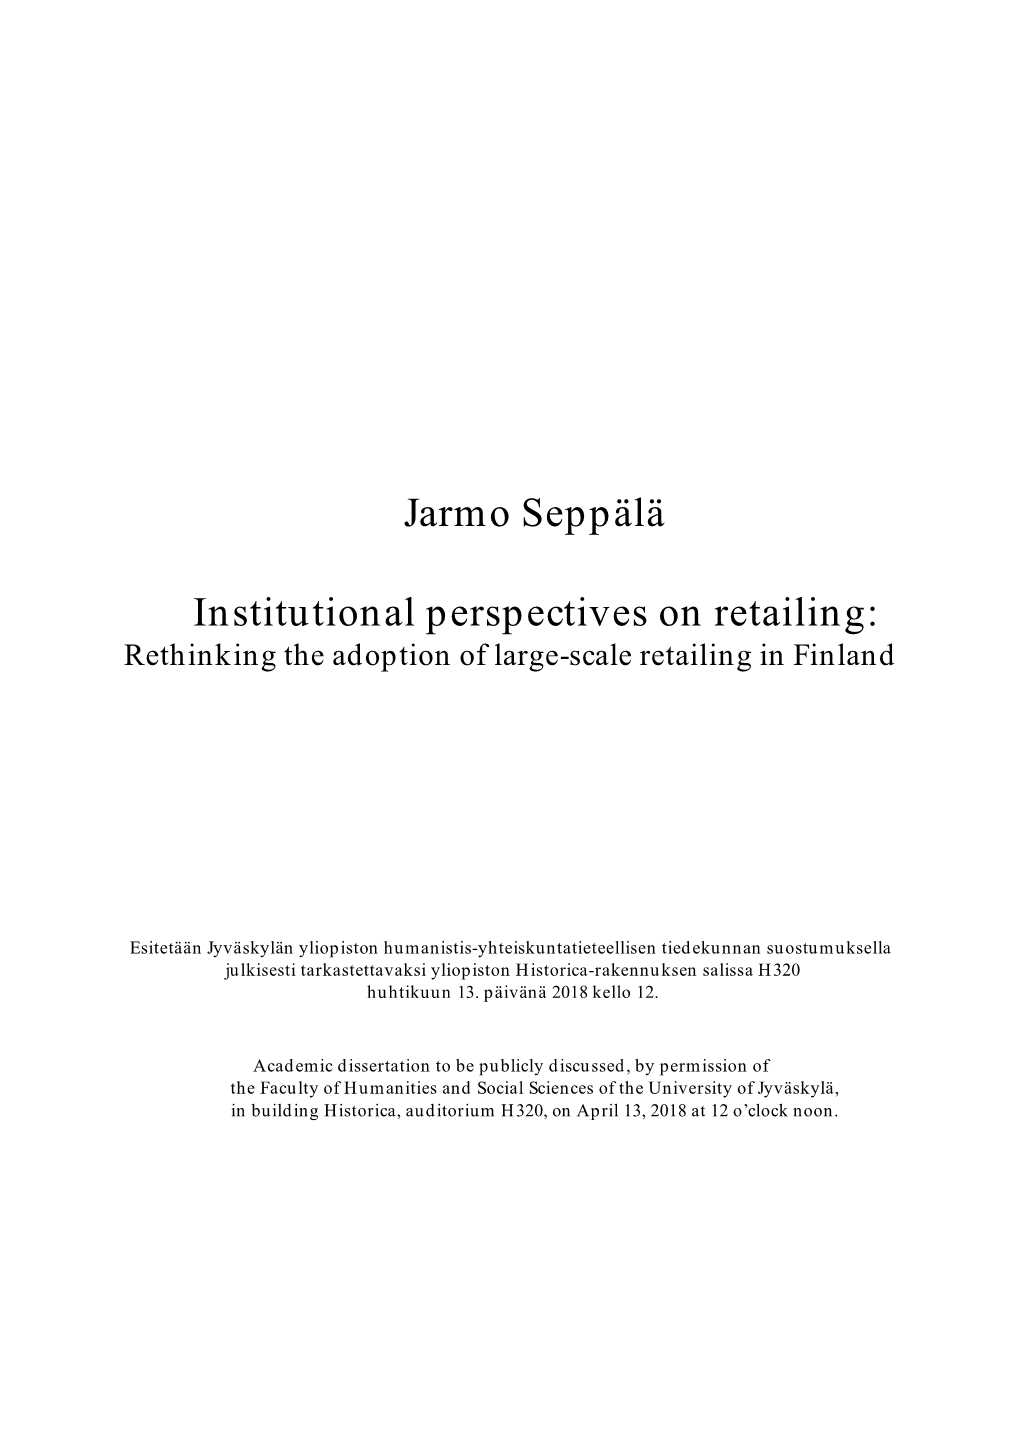 Institutional Perspectives on Retailing: Rethinking the Adoption of Large-Scale Retailing in Finland